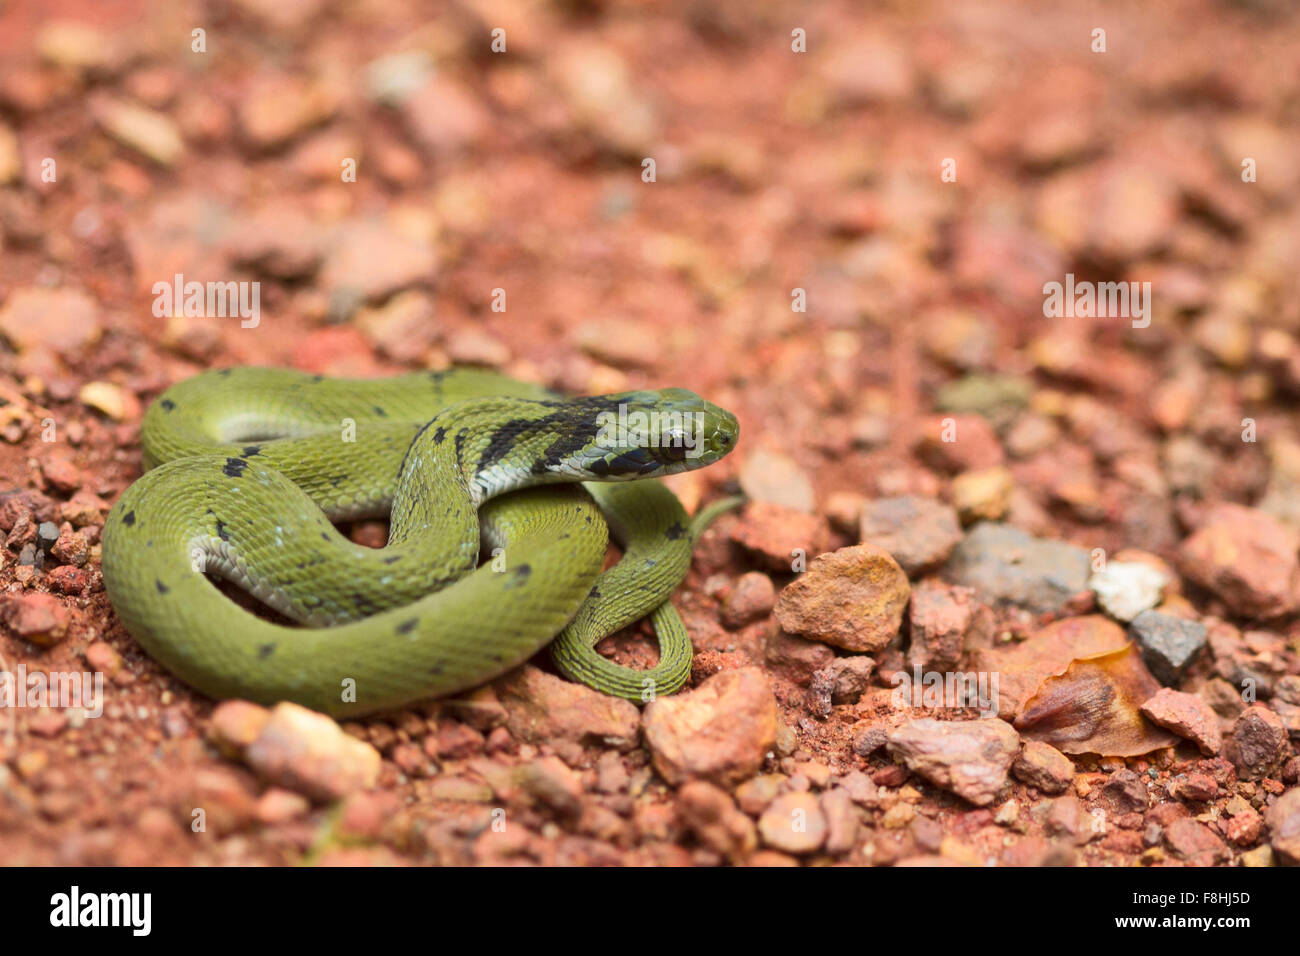 Green keelback juvenile, Macropisthodon plumbicolor a non-venomous snake that is endemic to the Western Ghats of India. Stock Photo